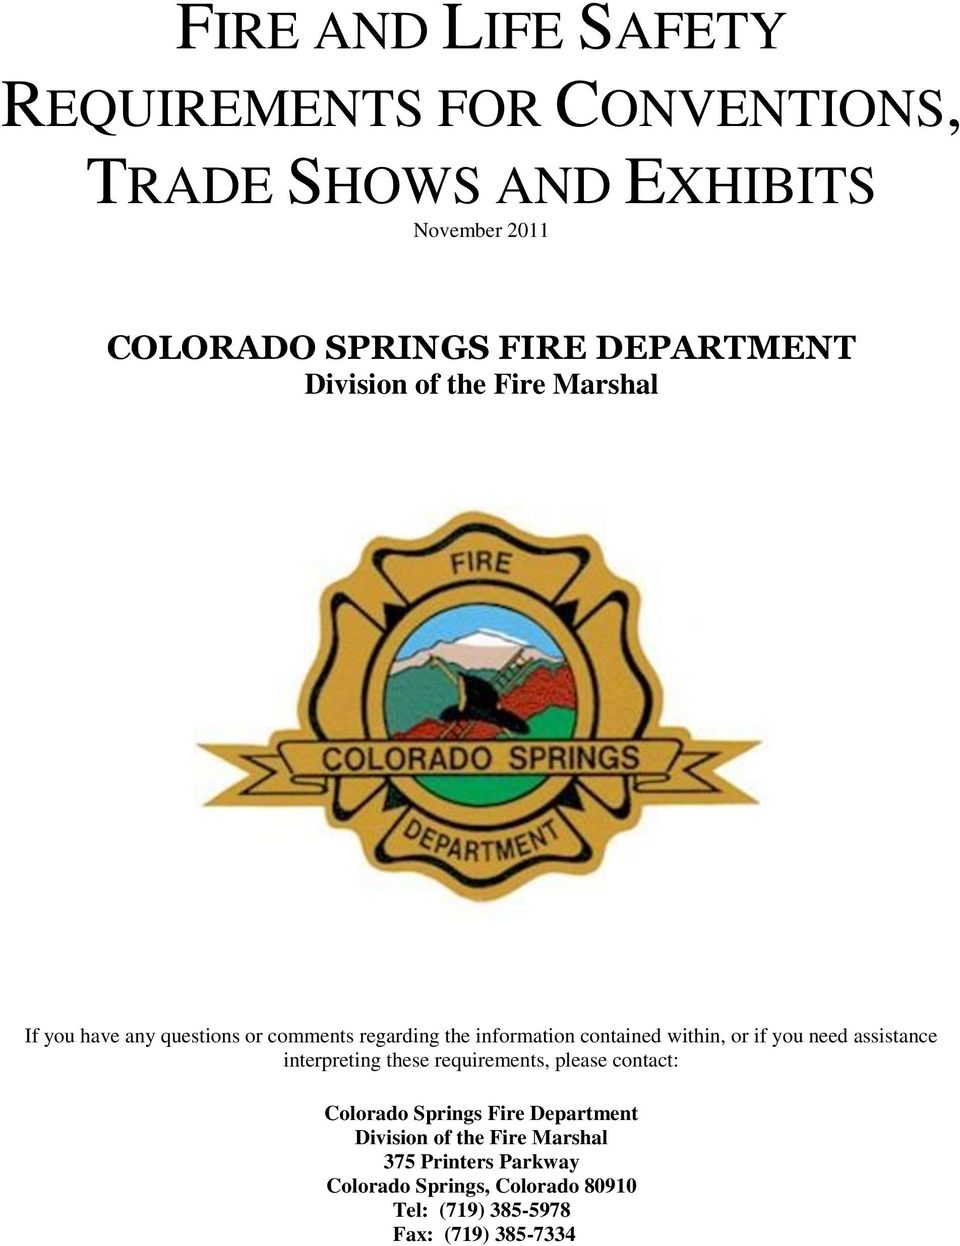 within, or if you need assistance interpreting these requirements, please contact: Colorado Springs Fire Department